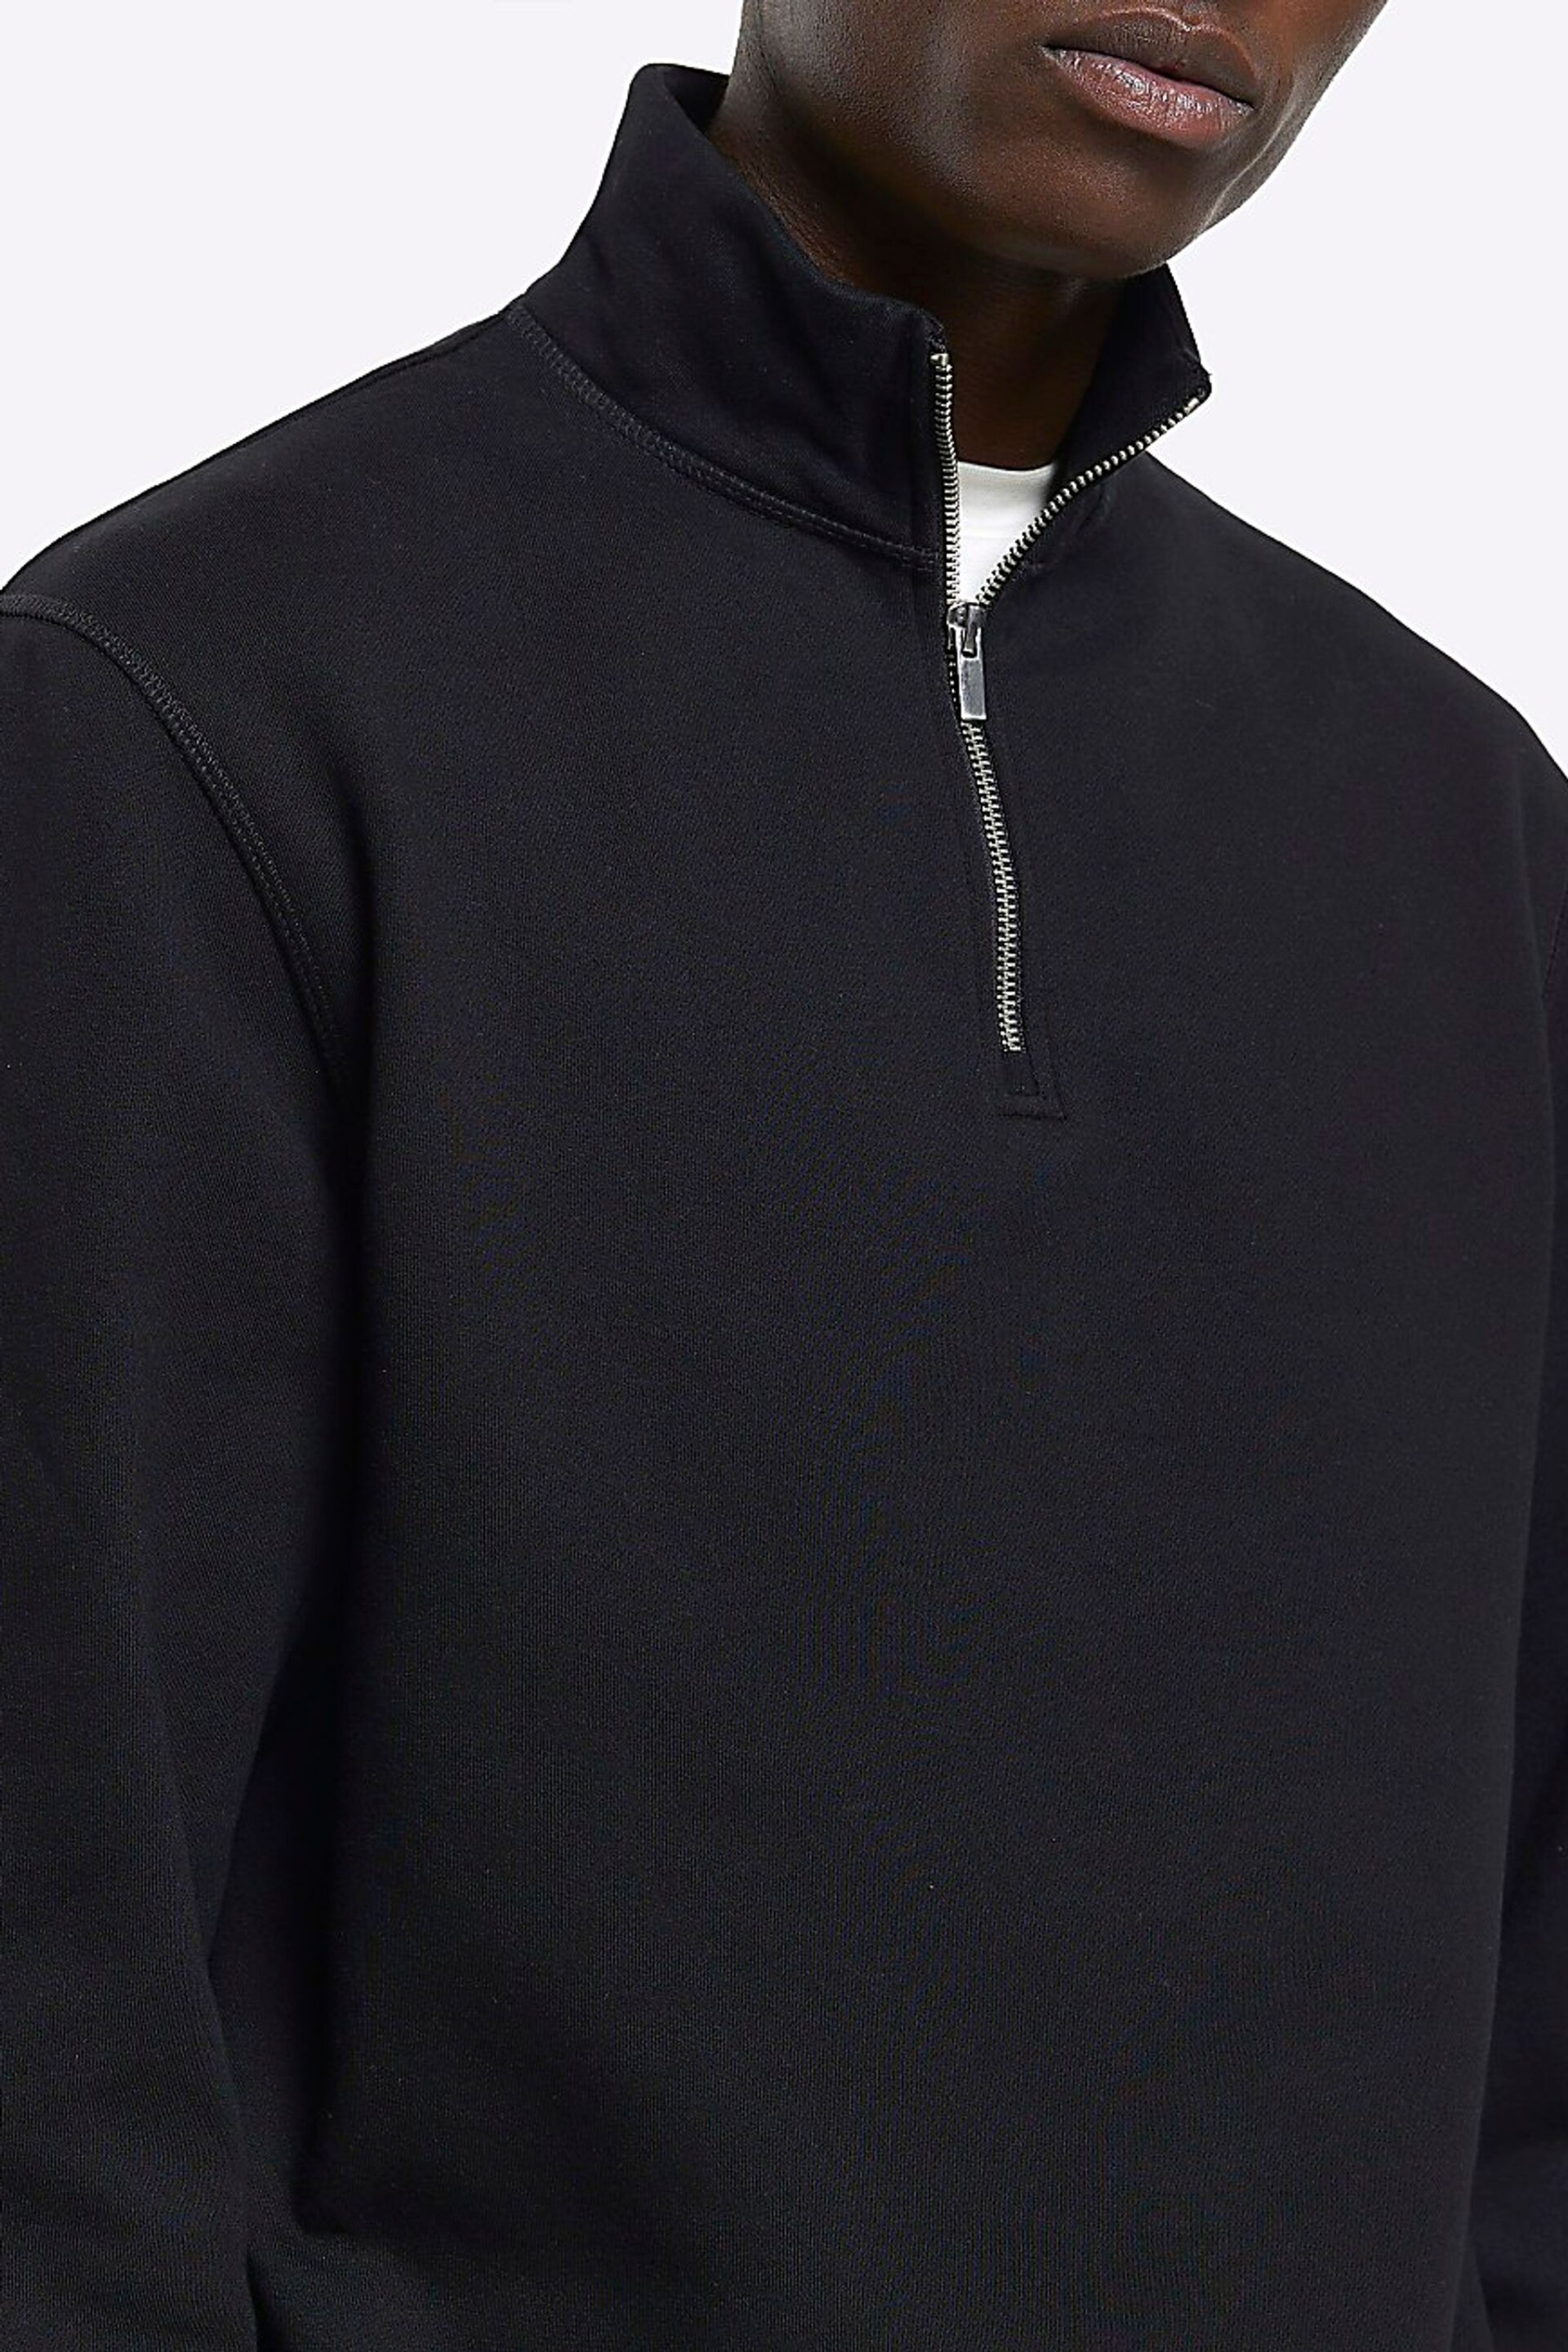 River Island Black Funnel Neck Polo Hoodie - Image 4 of 4